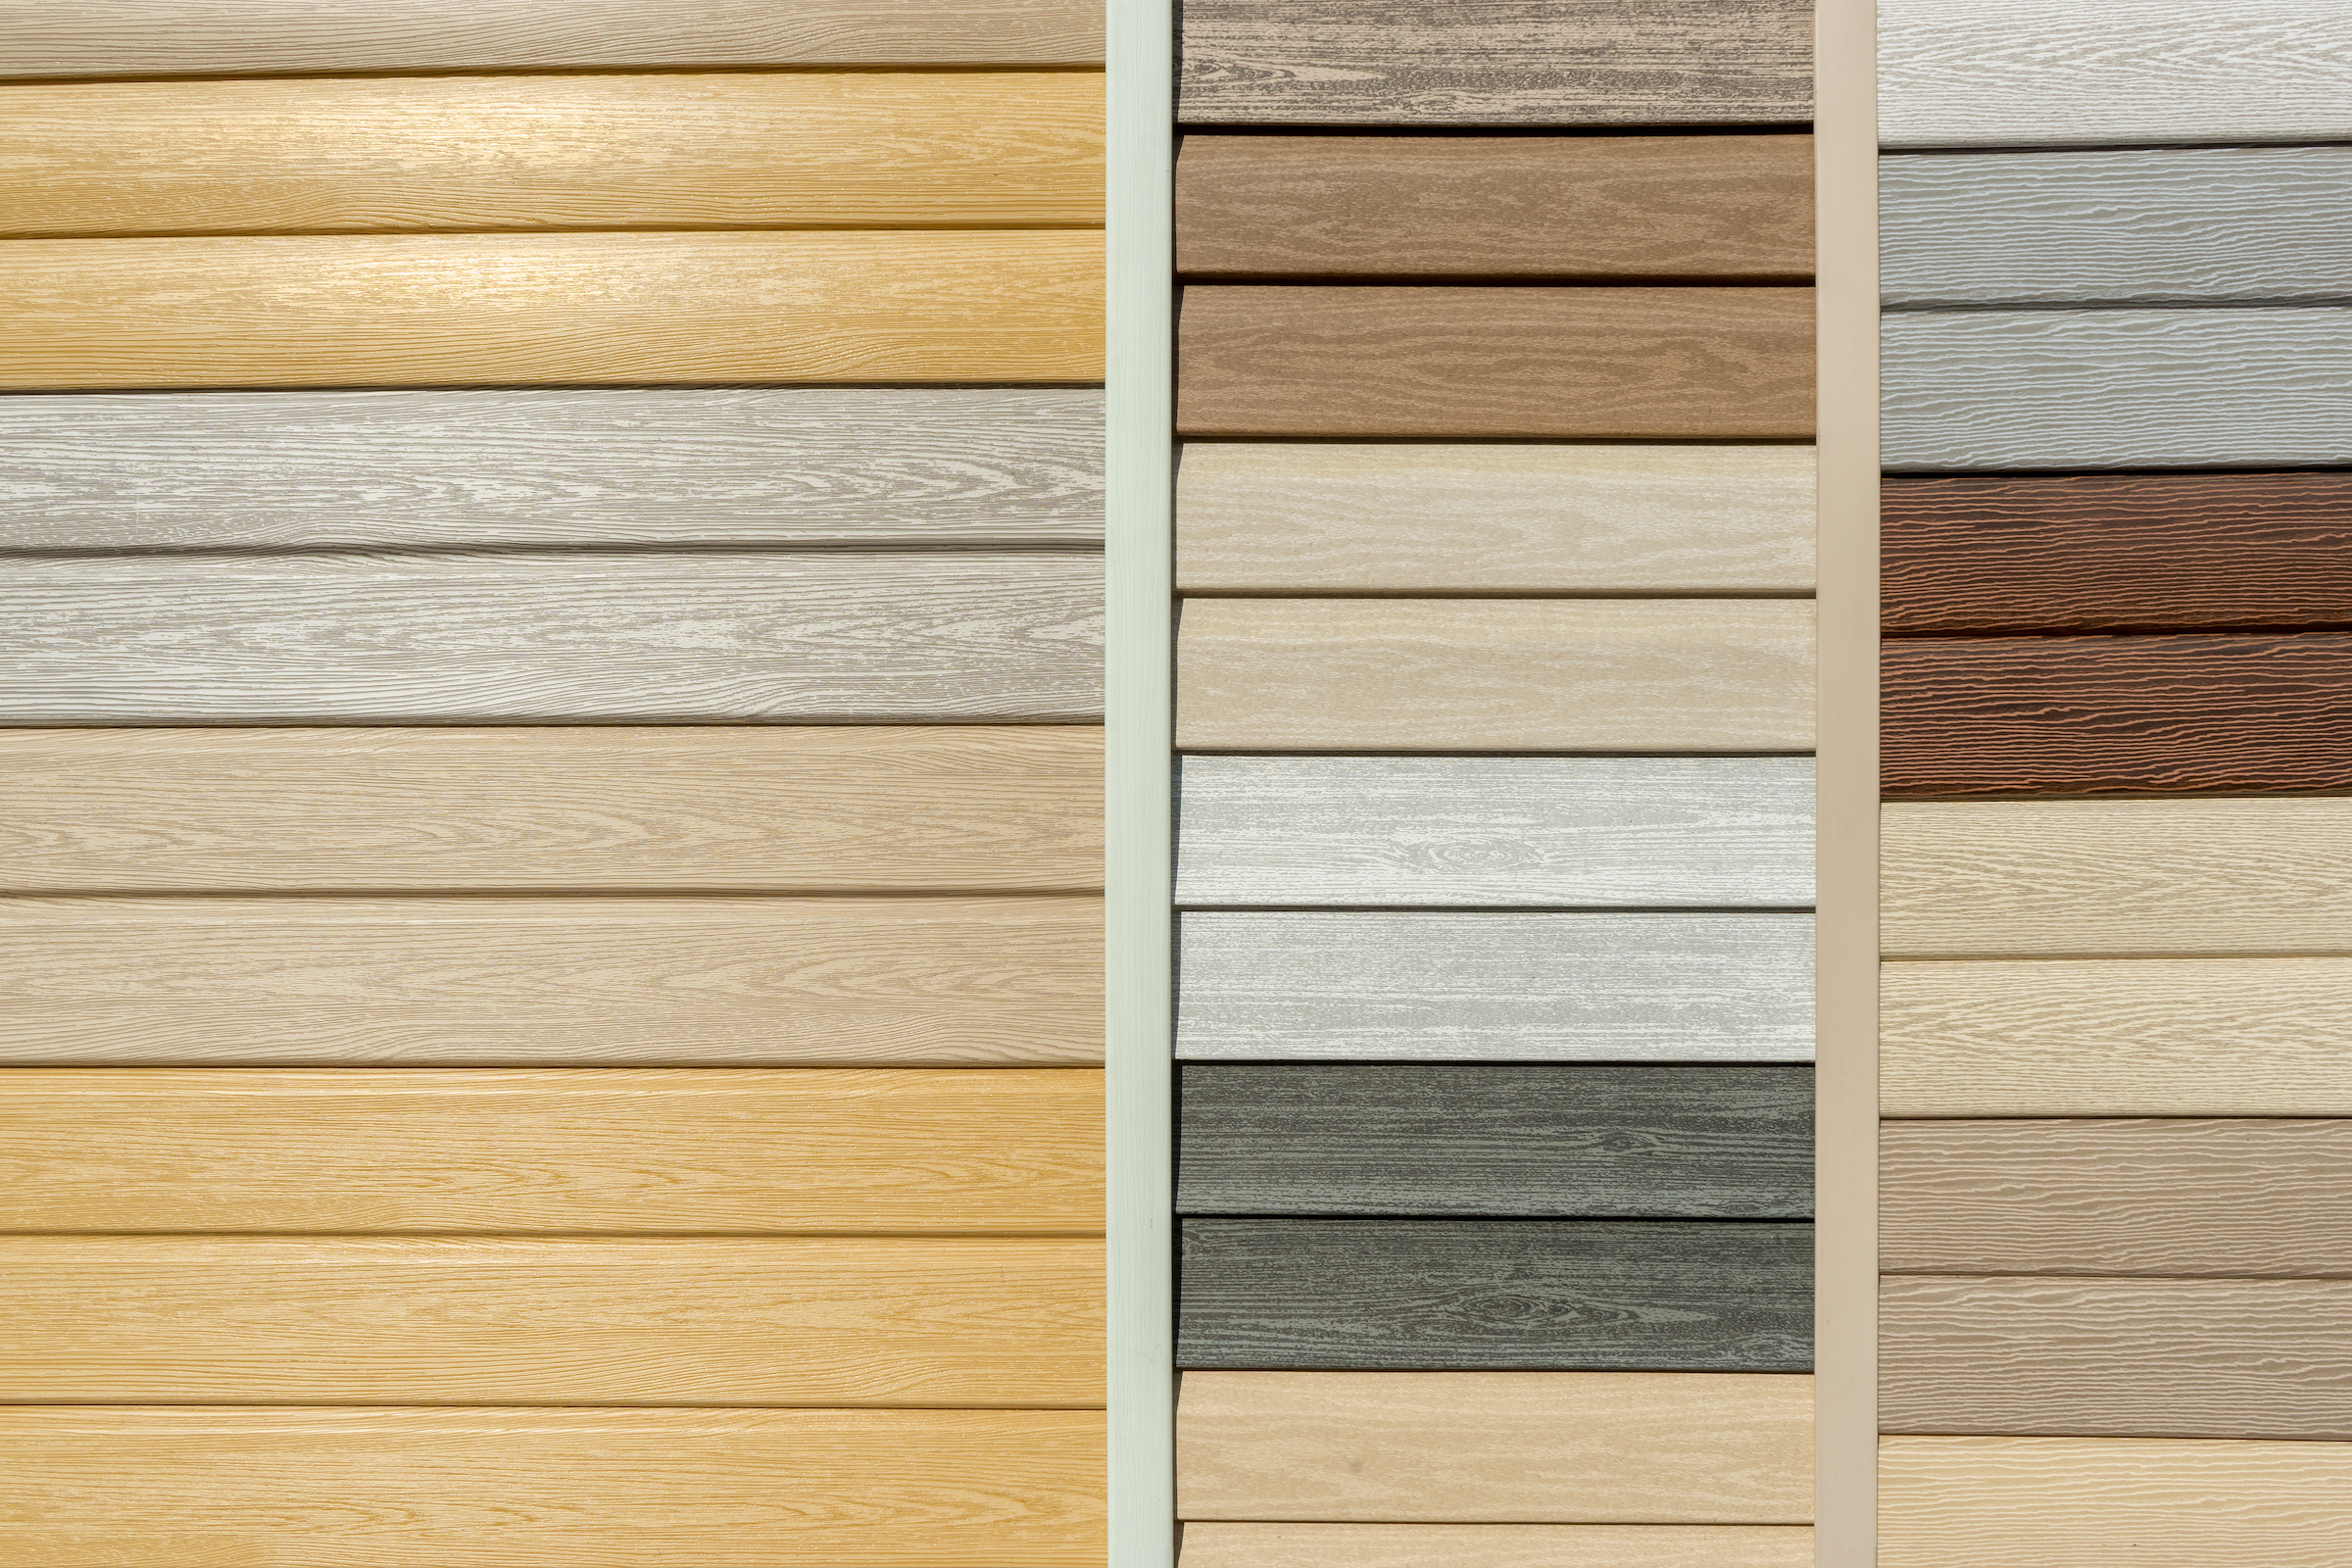 Choosing the right roofing and siding materials